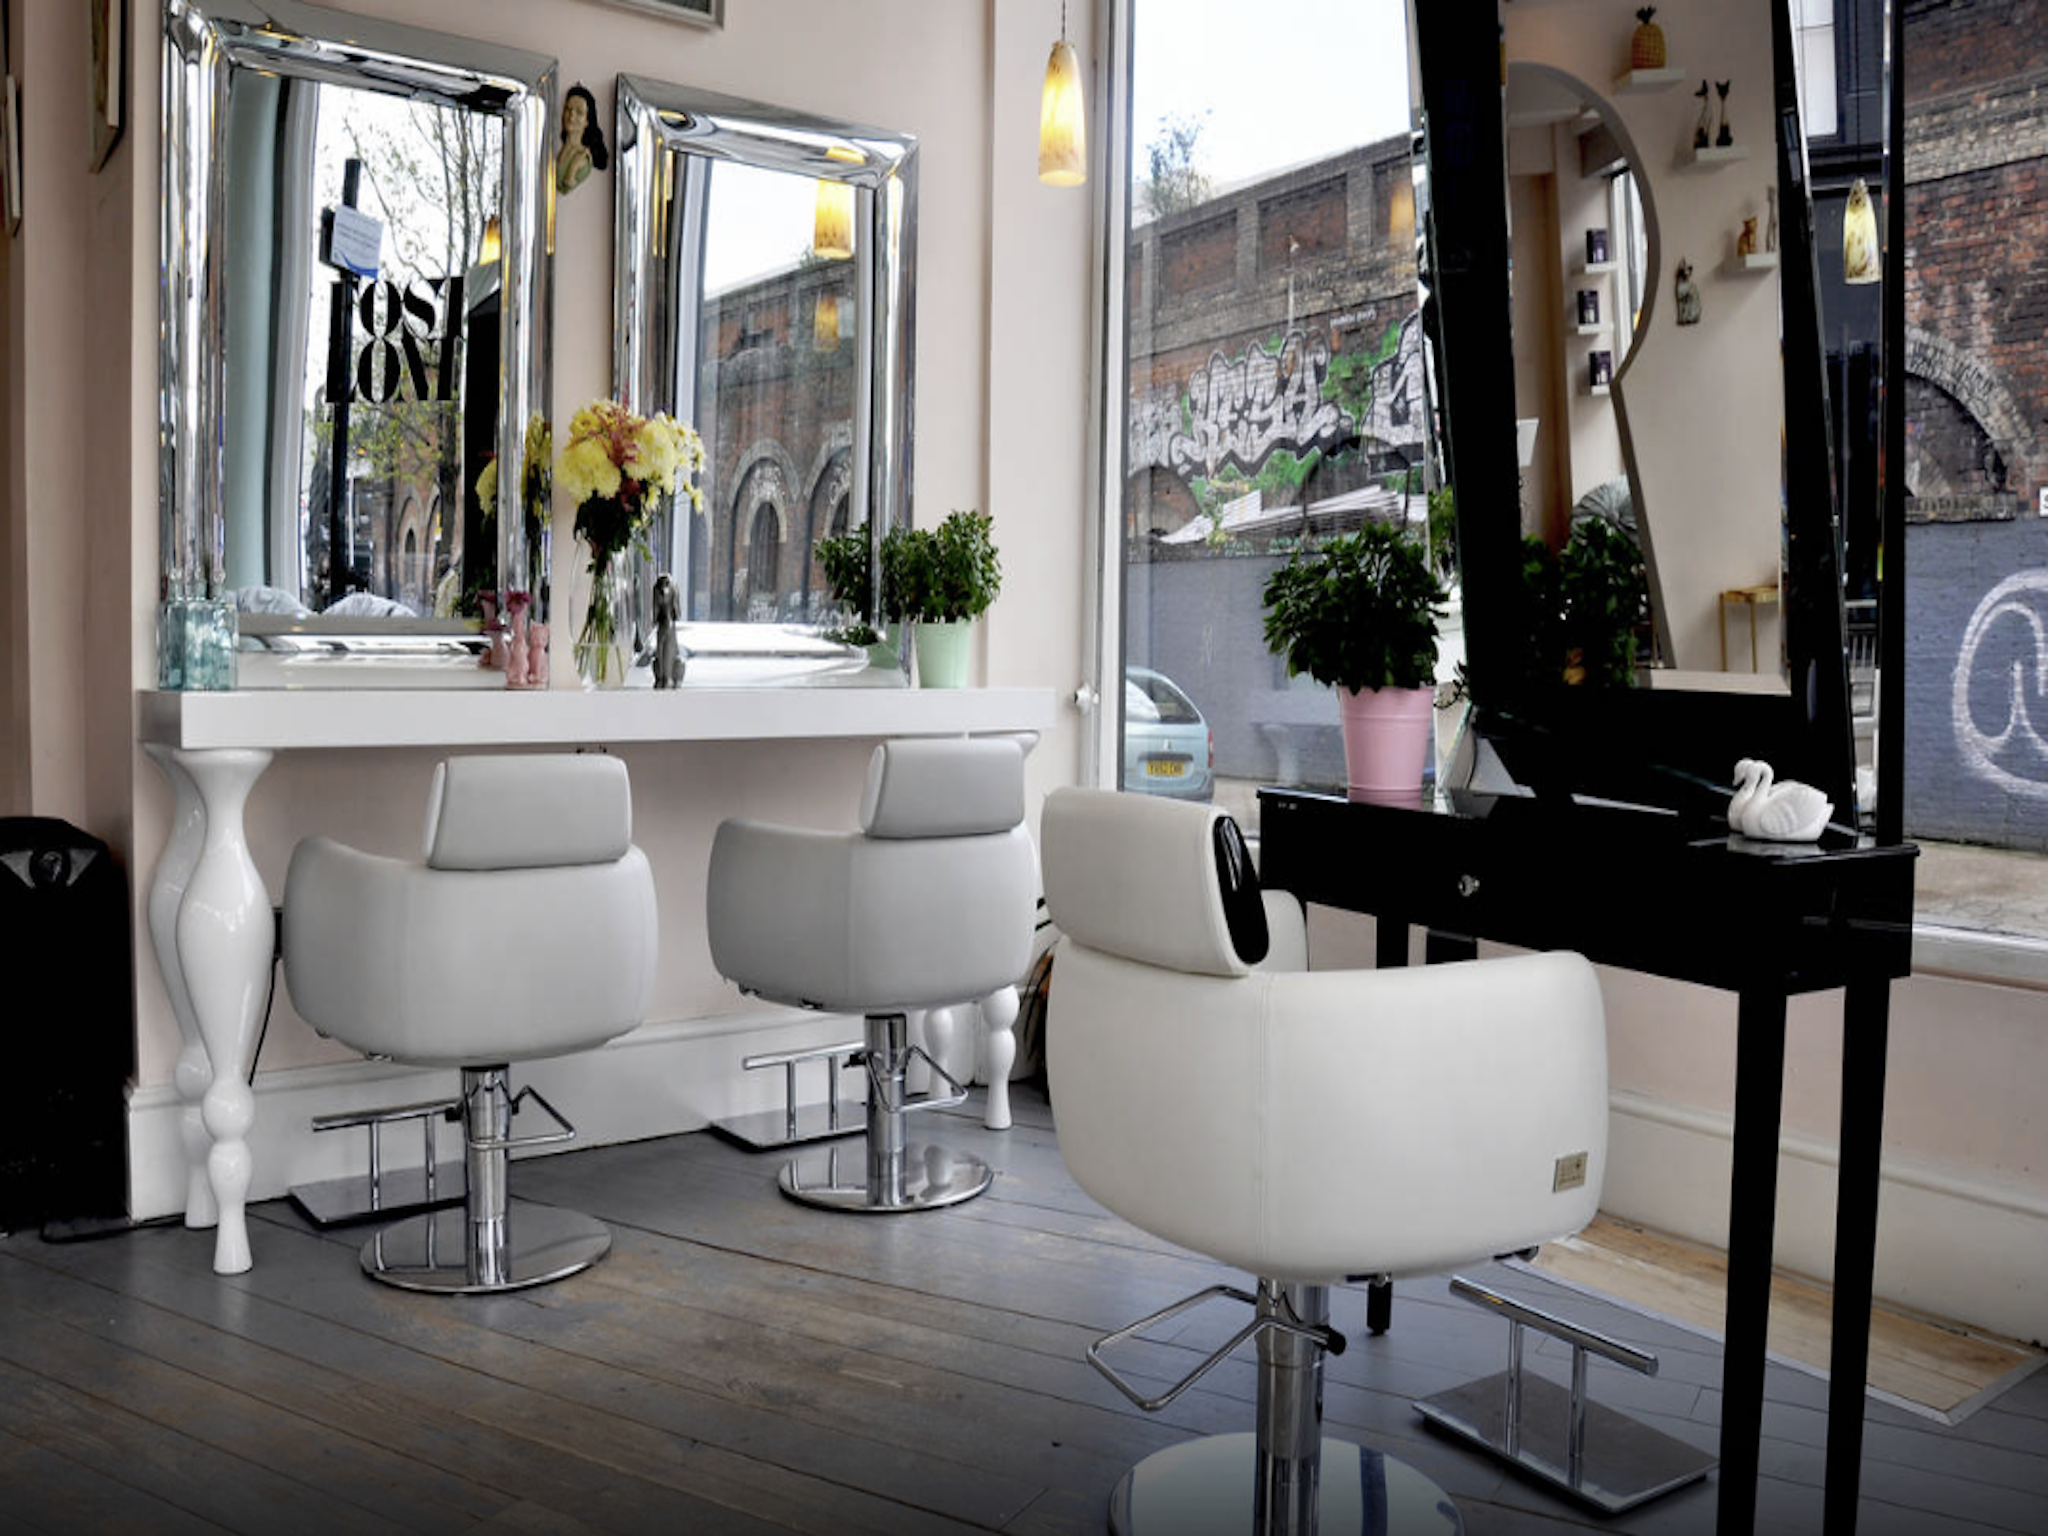 London's best hairdressers - Best hair salons and barbers in London - Time Out London